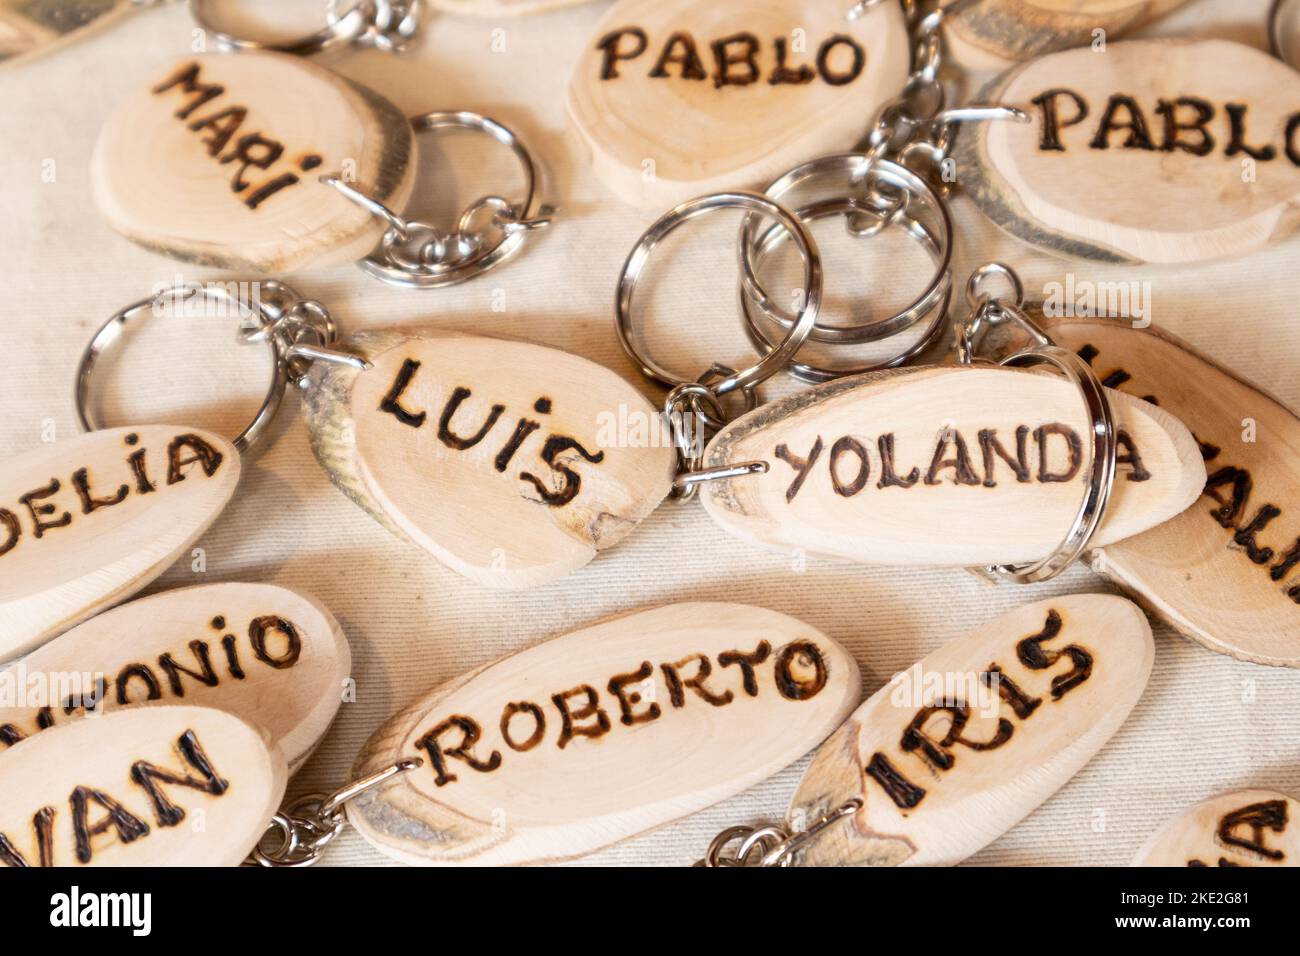 Handmade keyring, Gallery posted by clothesindahous